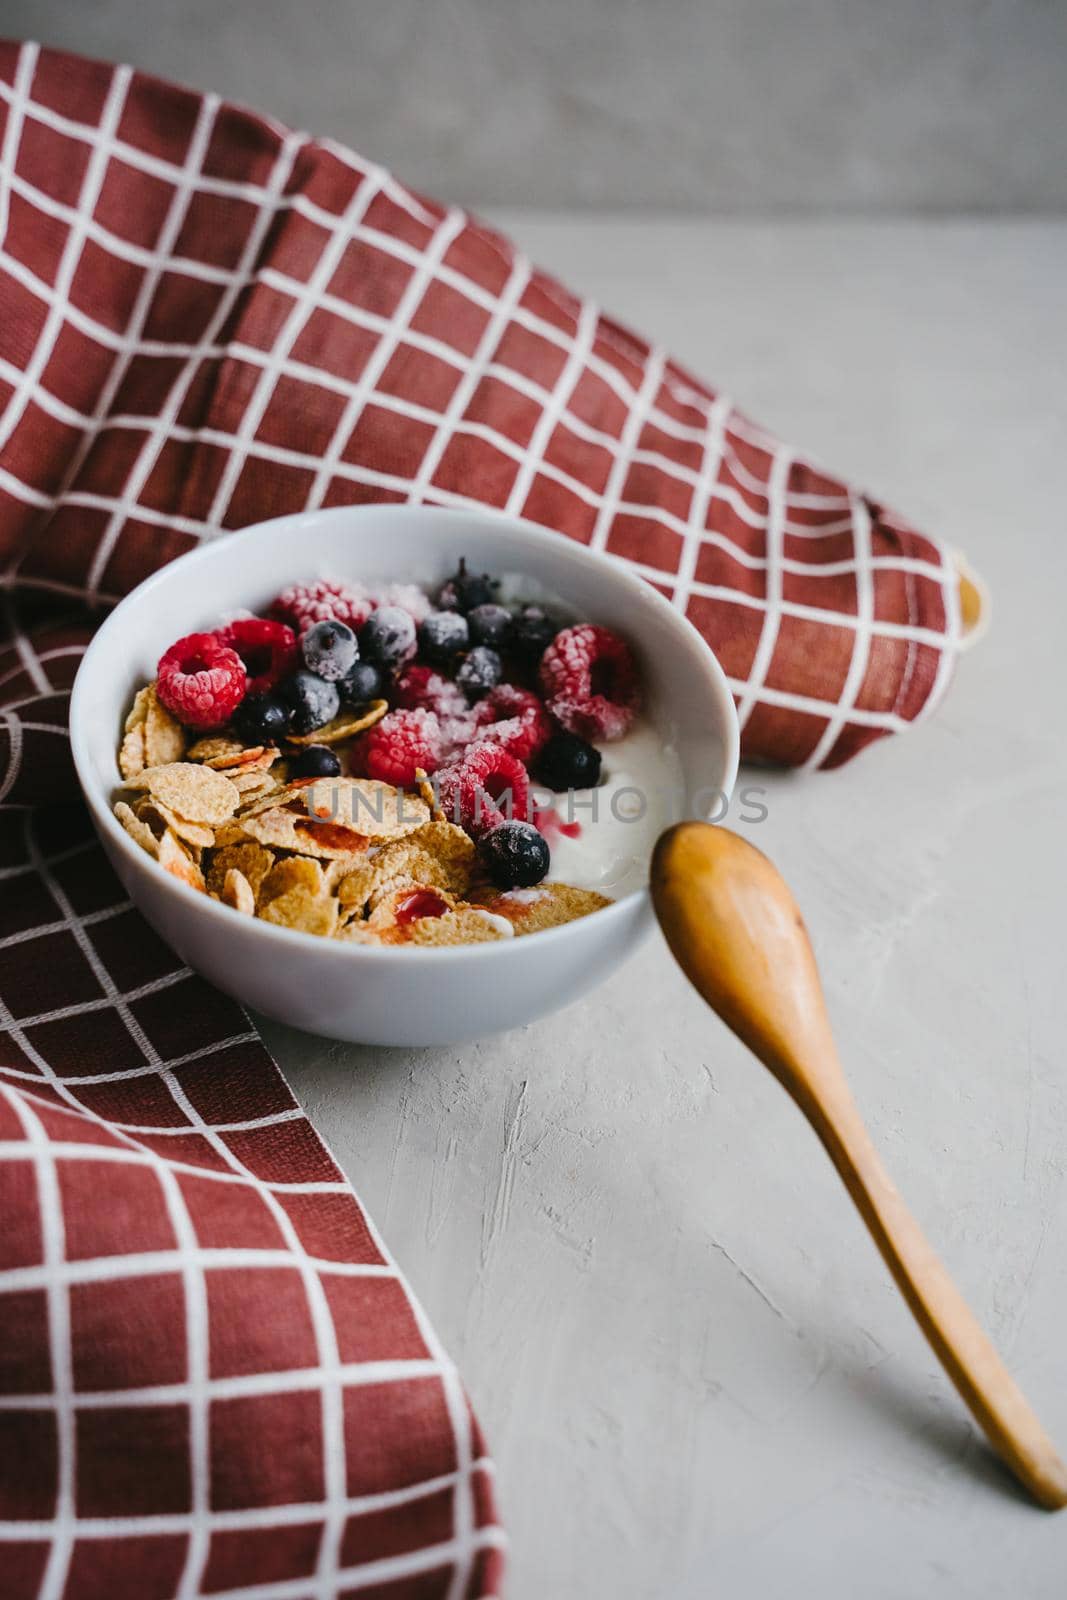 Delicious and healthy breakfast. Natural yogurt, cereals and berries. Frozen blackcurrant berries and raspberries. Wooden spoon. Multi-lacquered cereals for breakfast. Vertical photo.